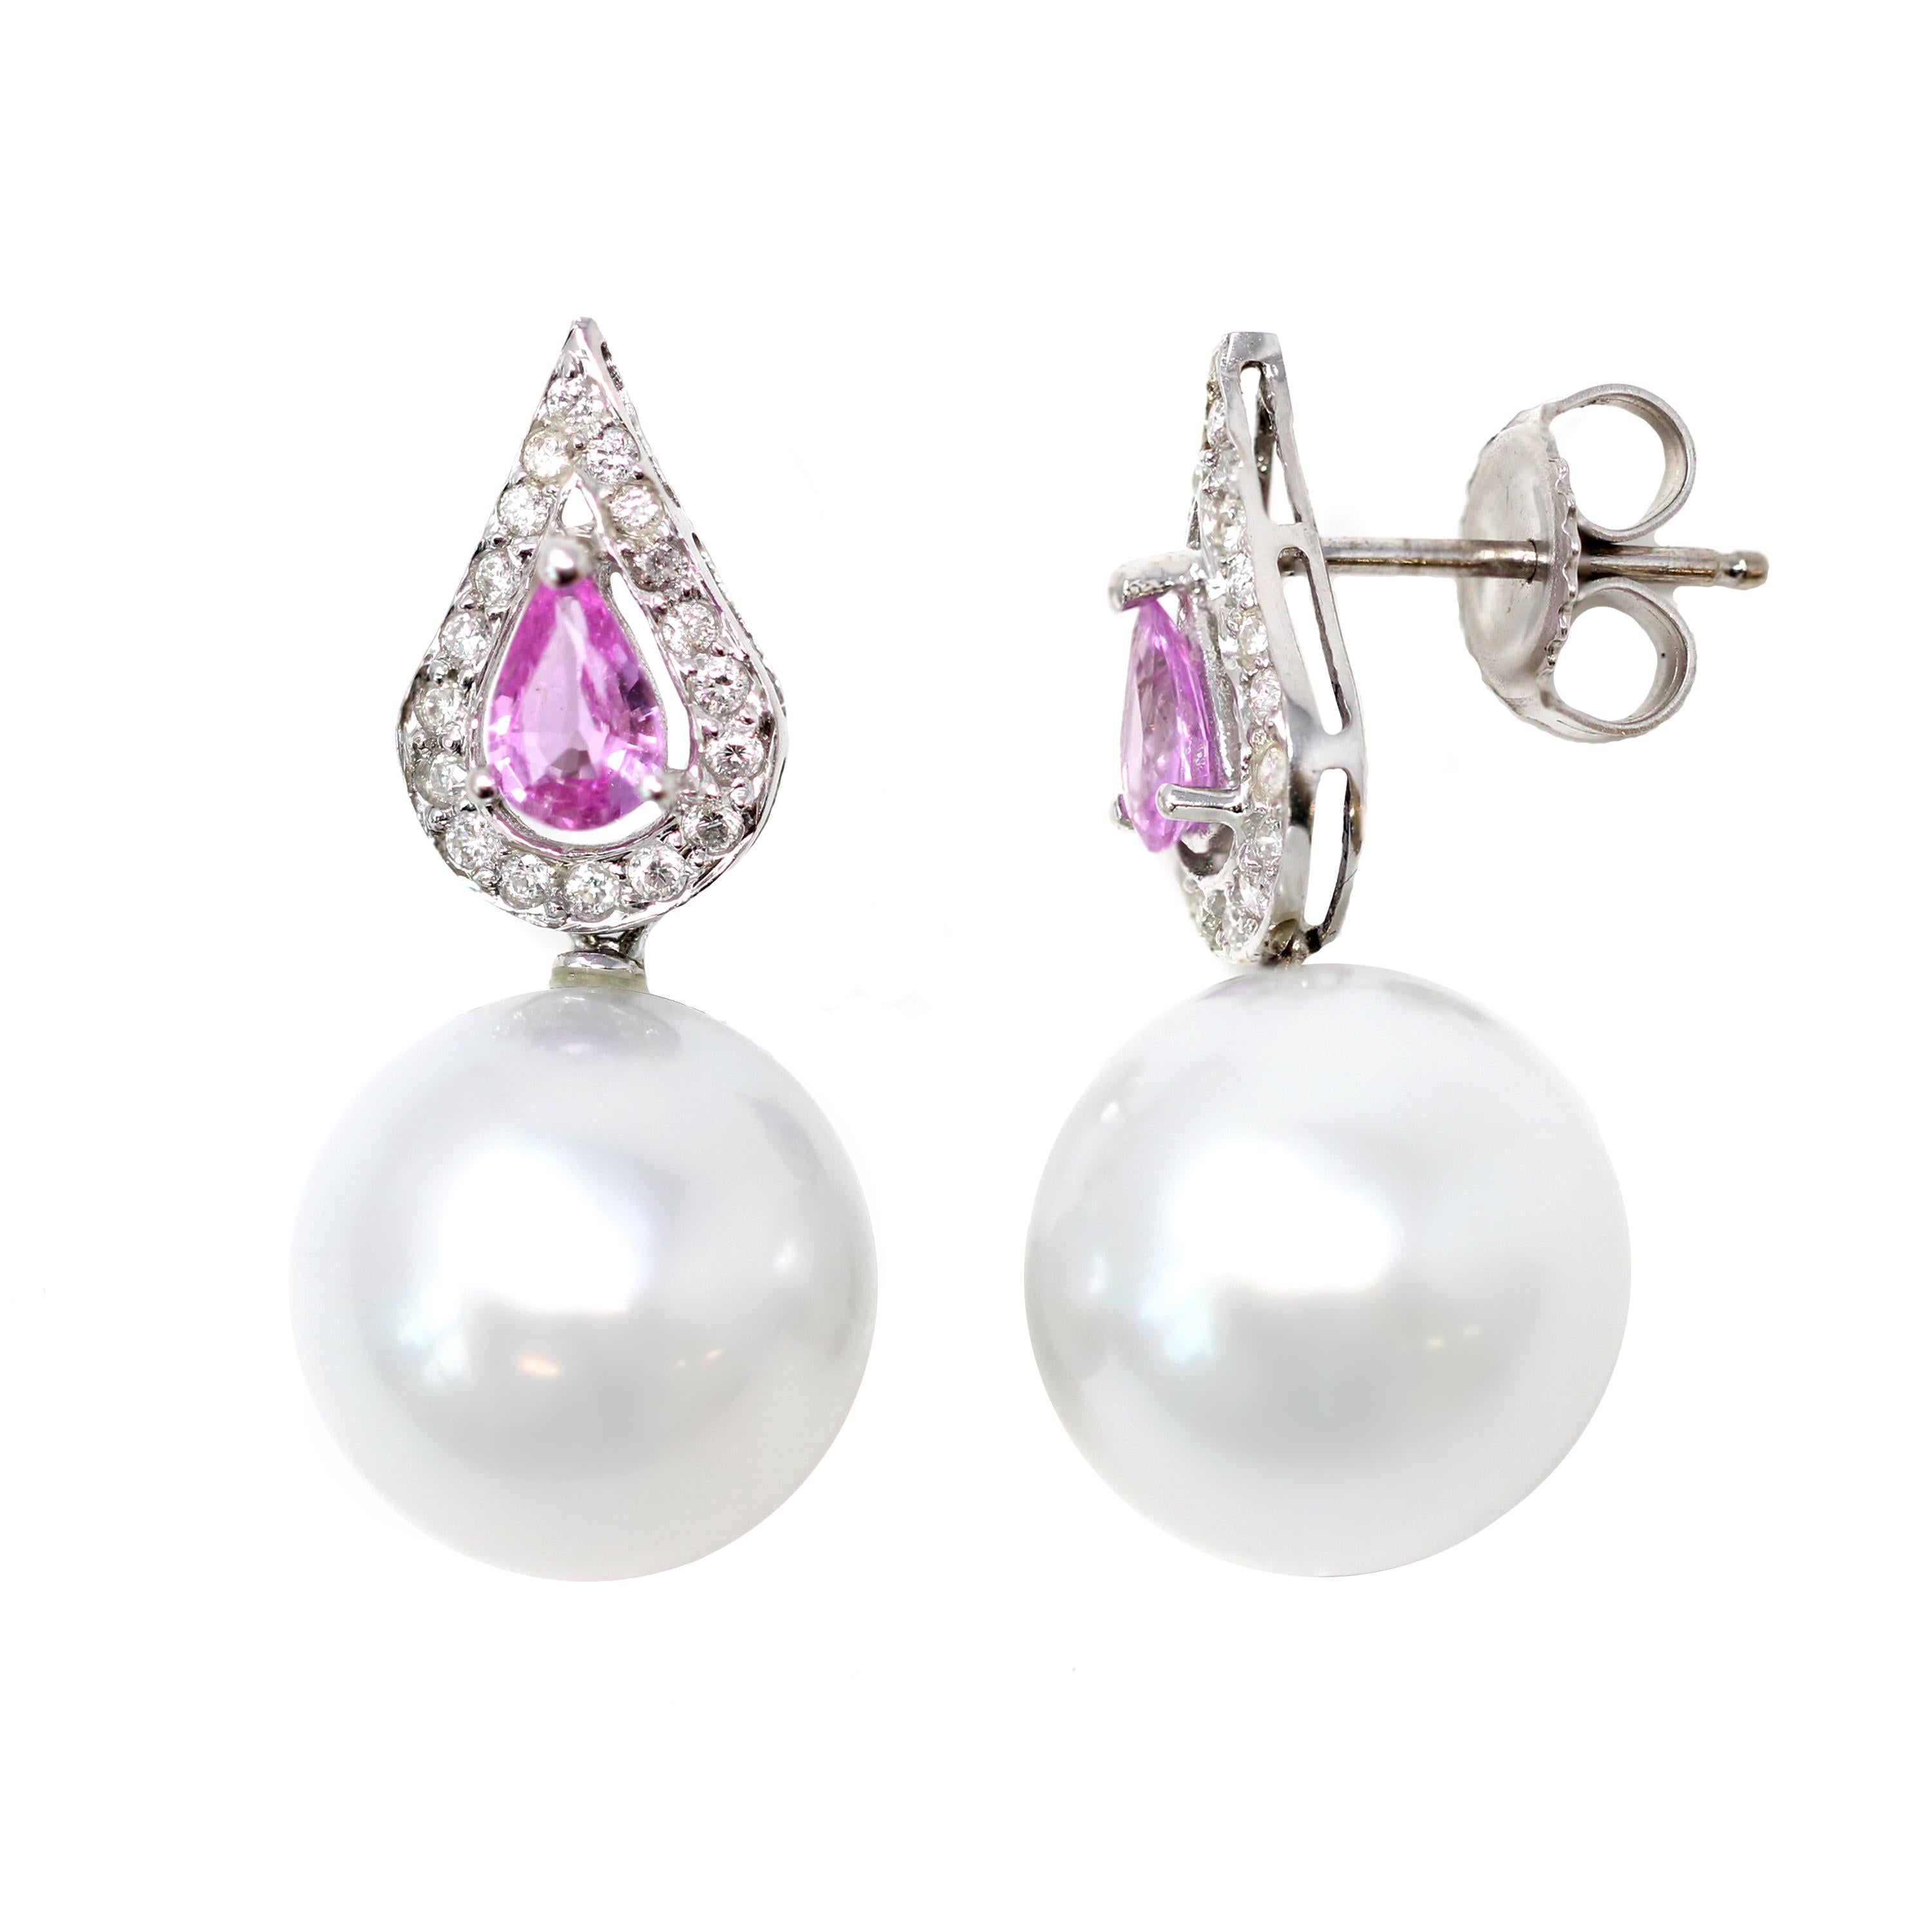 A pair of contemporary South Sea Pearl dangling earrings with Pink Sapphires and Diamonds, in 18K white gold. Made in the US, this pair of dangling earrings dazzles us with their 13.5 mm white round shape South Sea Pearls with excellent luster and